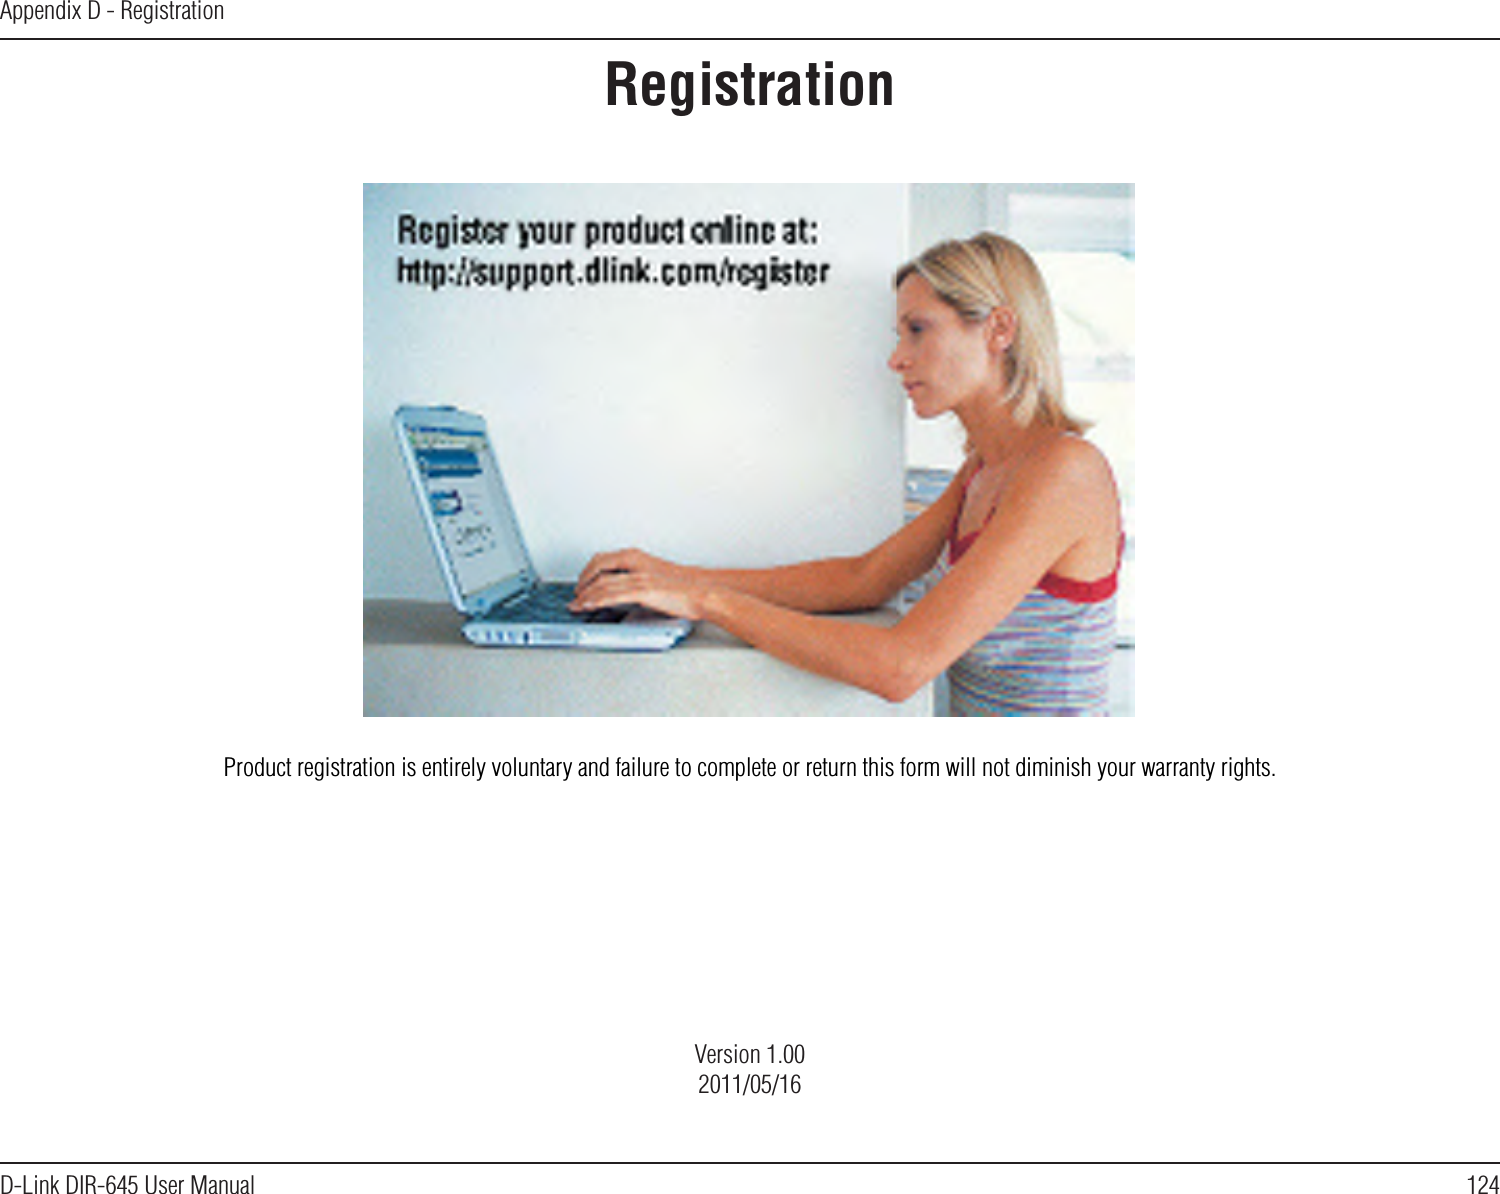 124D-Link DIR-645 User ManualAppendix D - RegistrationRegistrationProduct registration is entirely voluntary and failure to complete or return this form will not diminish your warranty rights.Version 1.002011/05/16